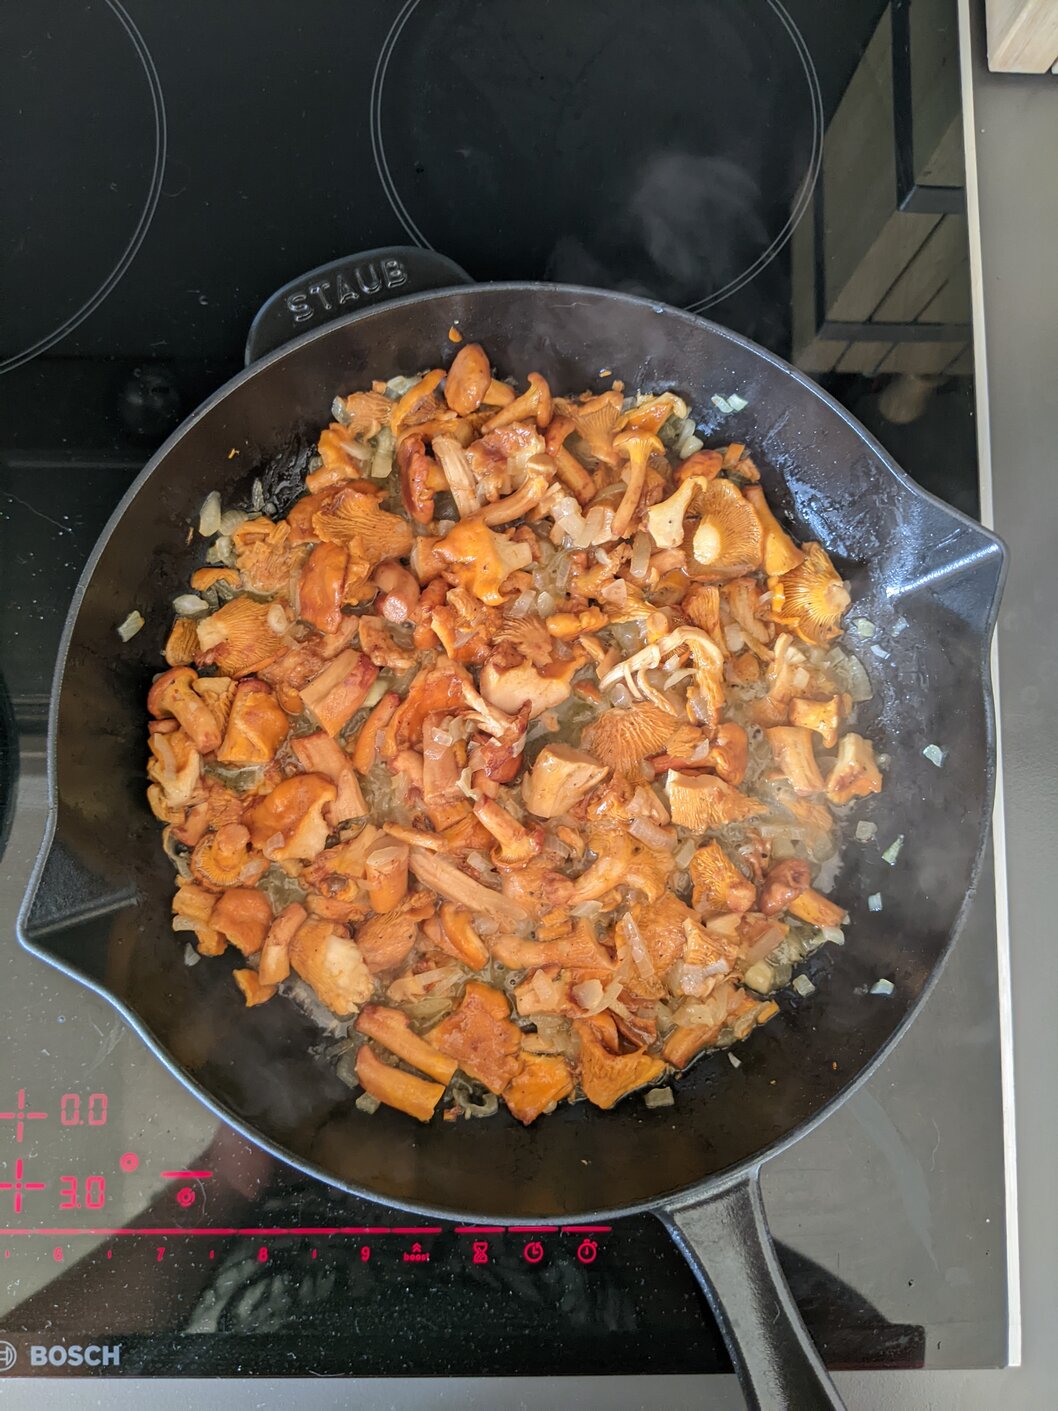 Onion and mushrooms in a skillet